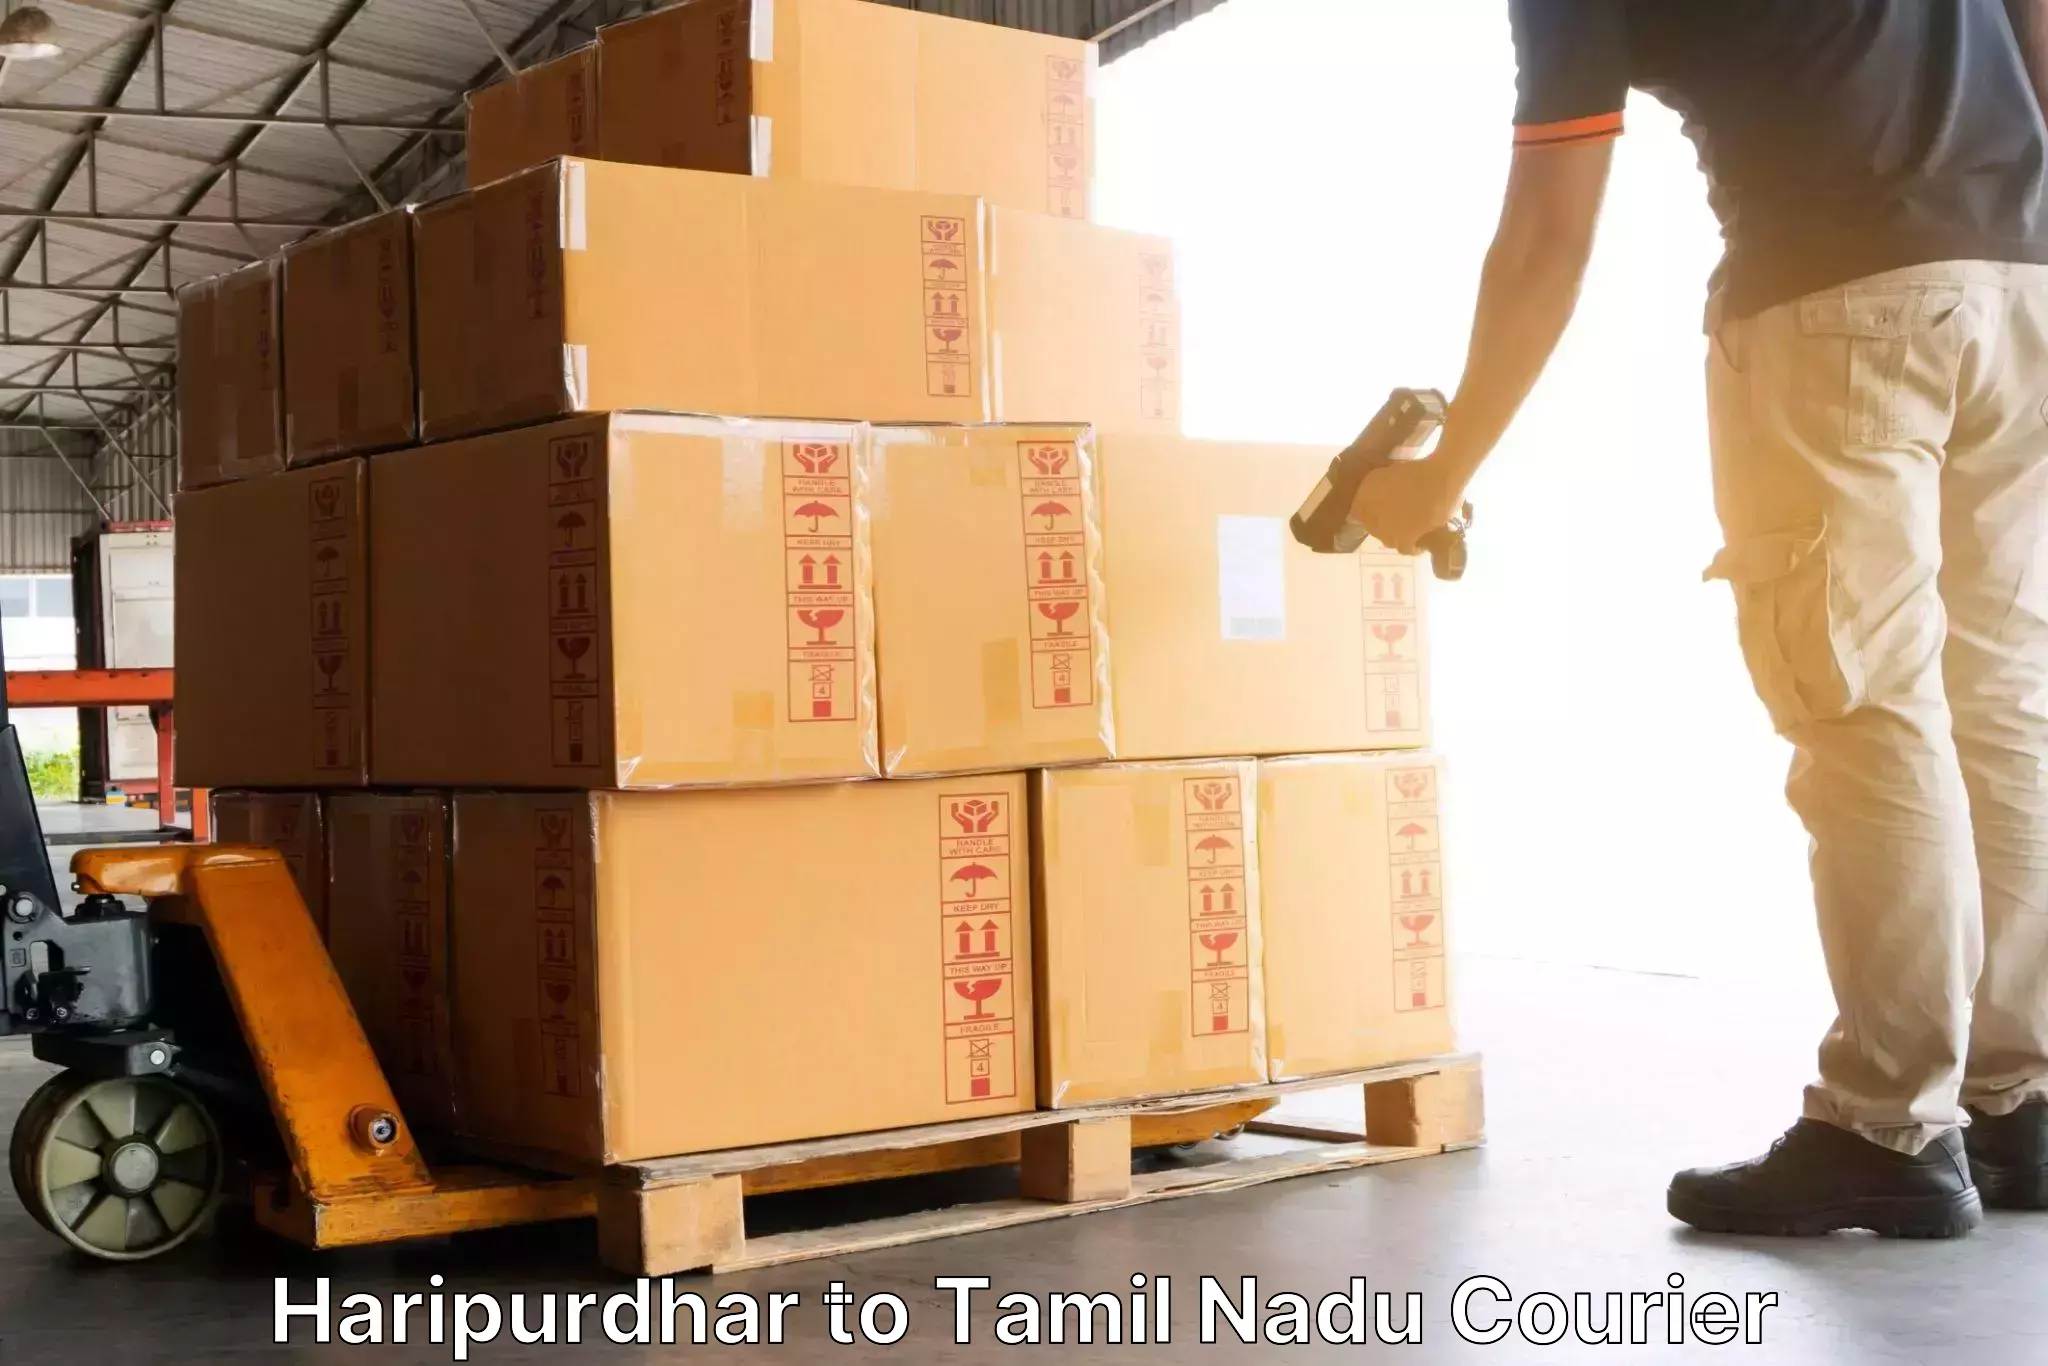 End-to-end delivery in Haripurdhar to Peravurani